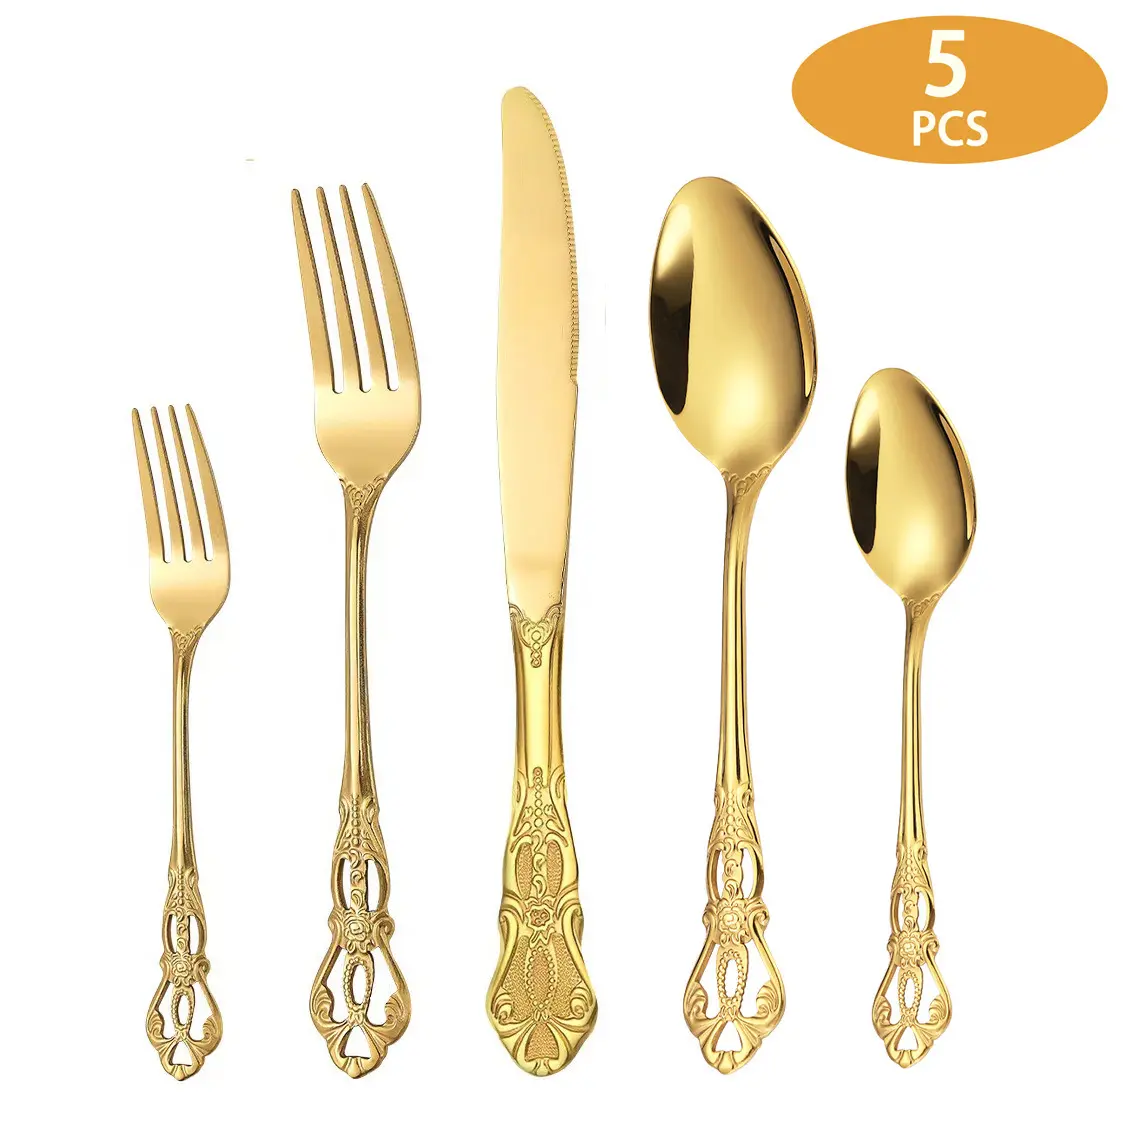 Banquet Royal Luxury Cutlery Set Gold Spoon Fork and Knife Silverware Set Heavy Duty Stainless Steel Vintage Gold Flatware Set